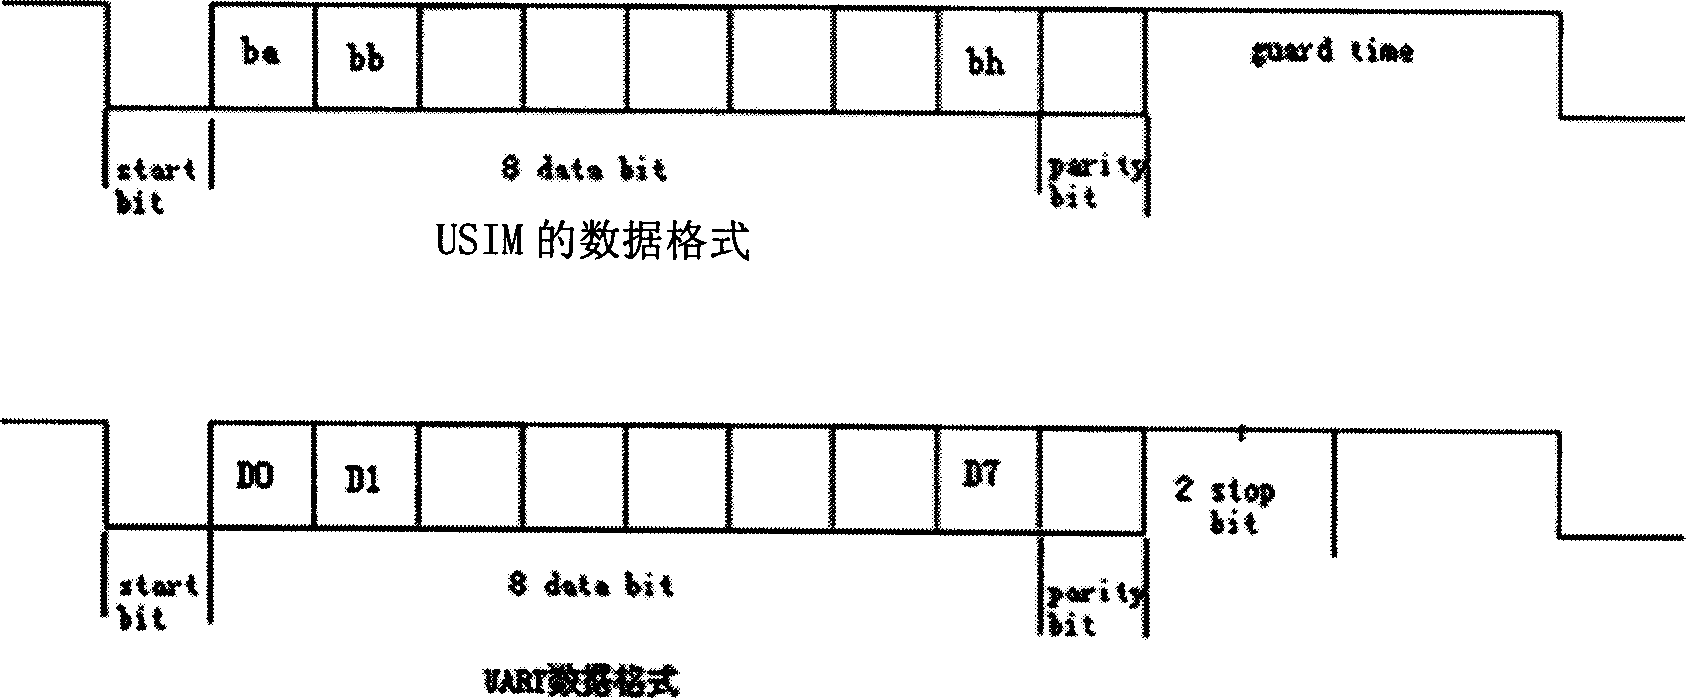 Connector between processor and user recognition card